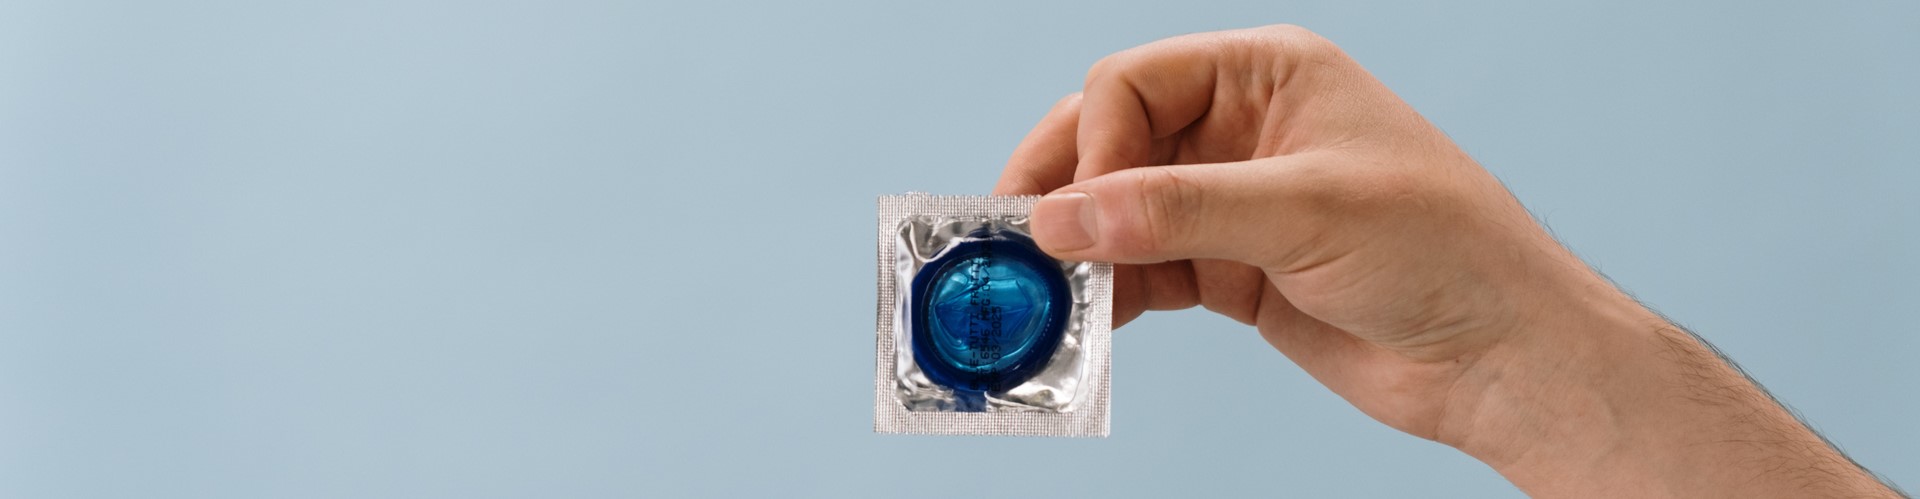 Photo of a hand holding a condom on a light blue background